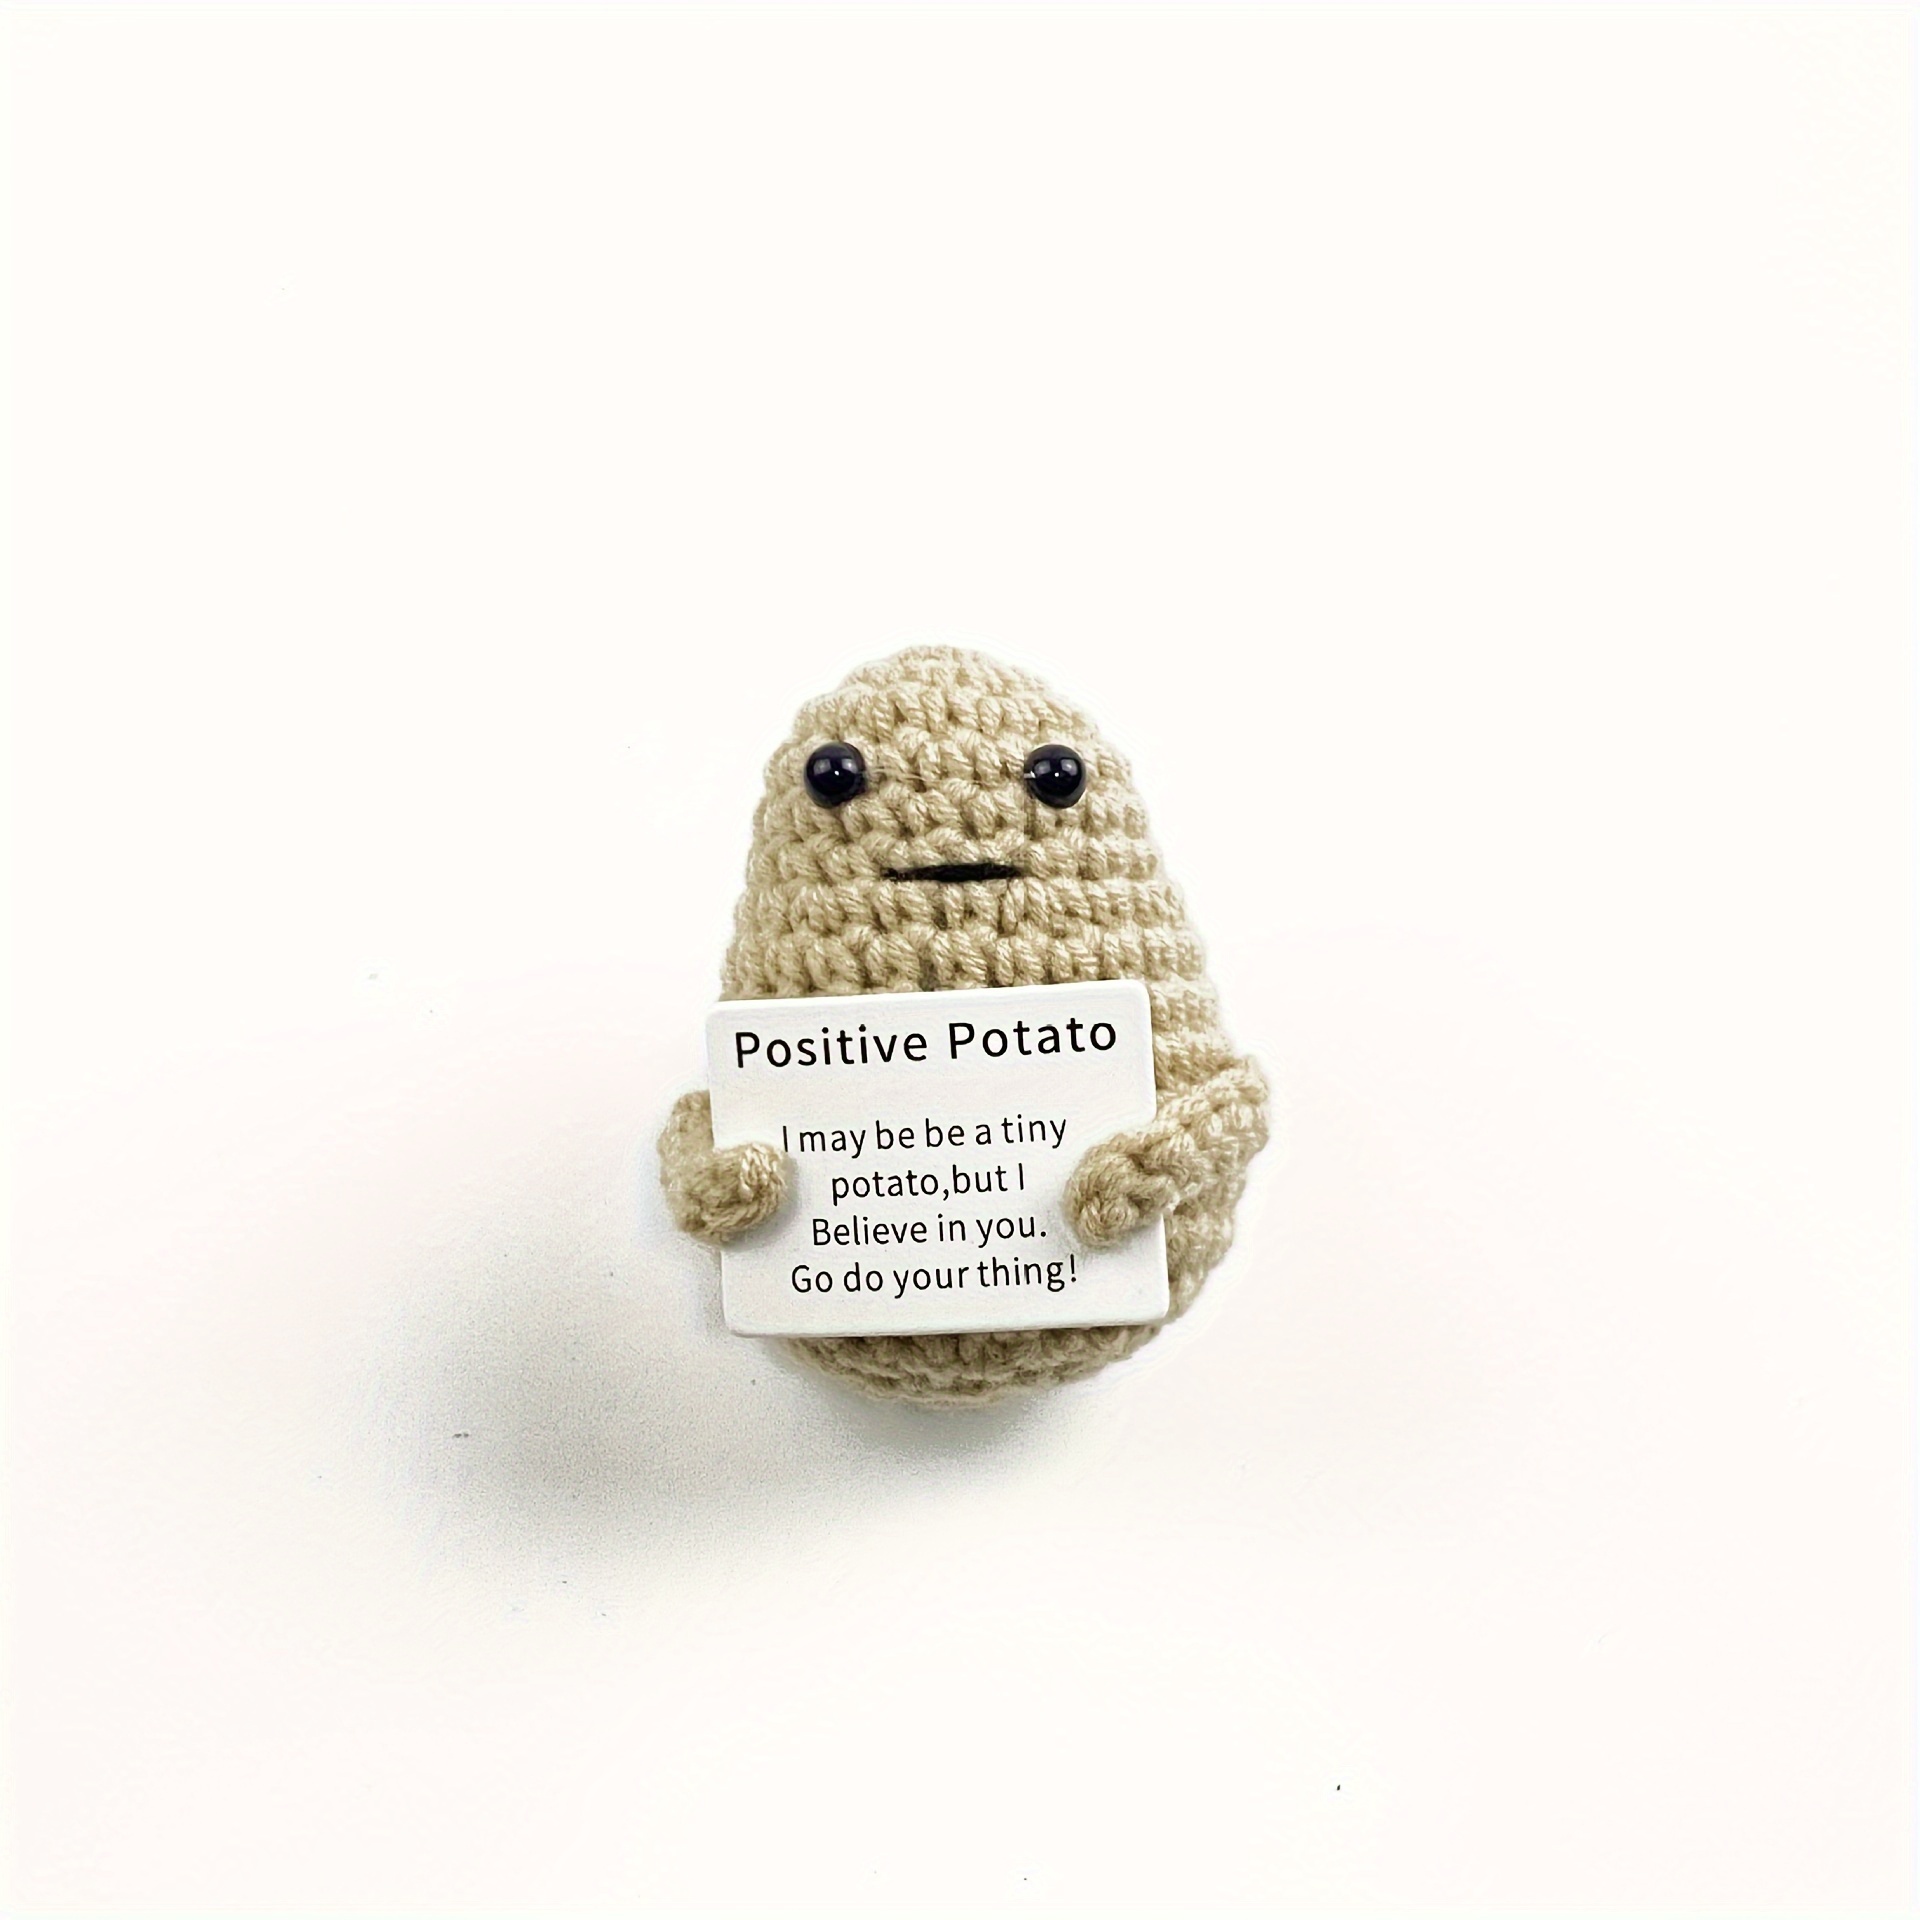  Buogint Funny Positive Incentive Potato Crochet with Inspiring  Card Tiny Crochet Creative Potato Ornaments Unique Give Family and Best  Friend Birthday Encouragement Party Gifts : Toys & Games